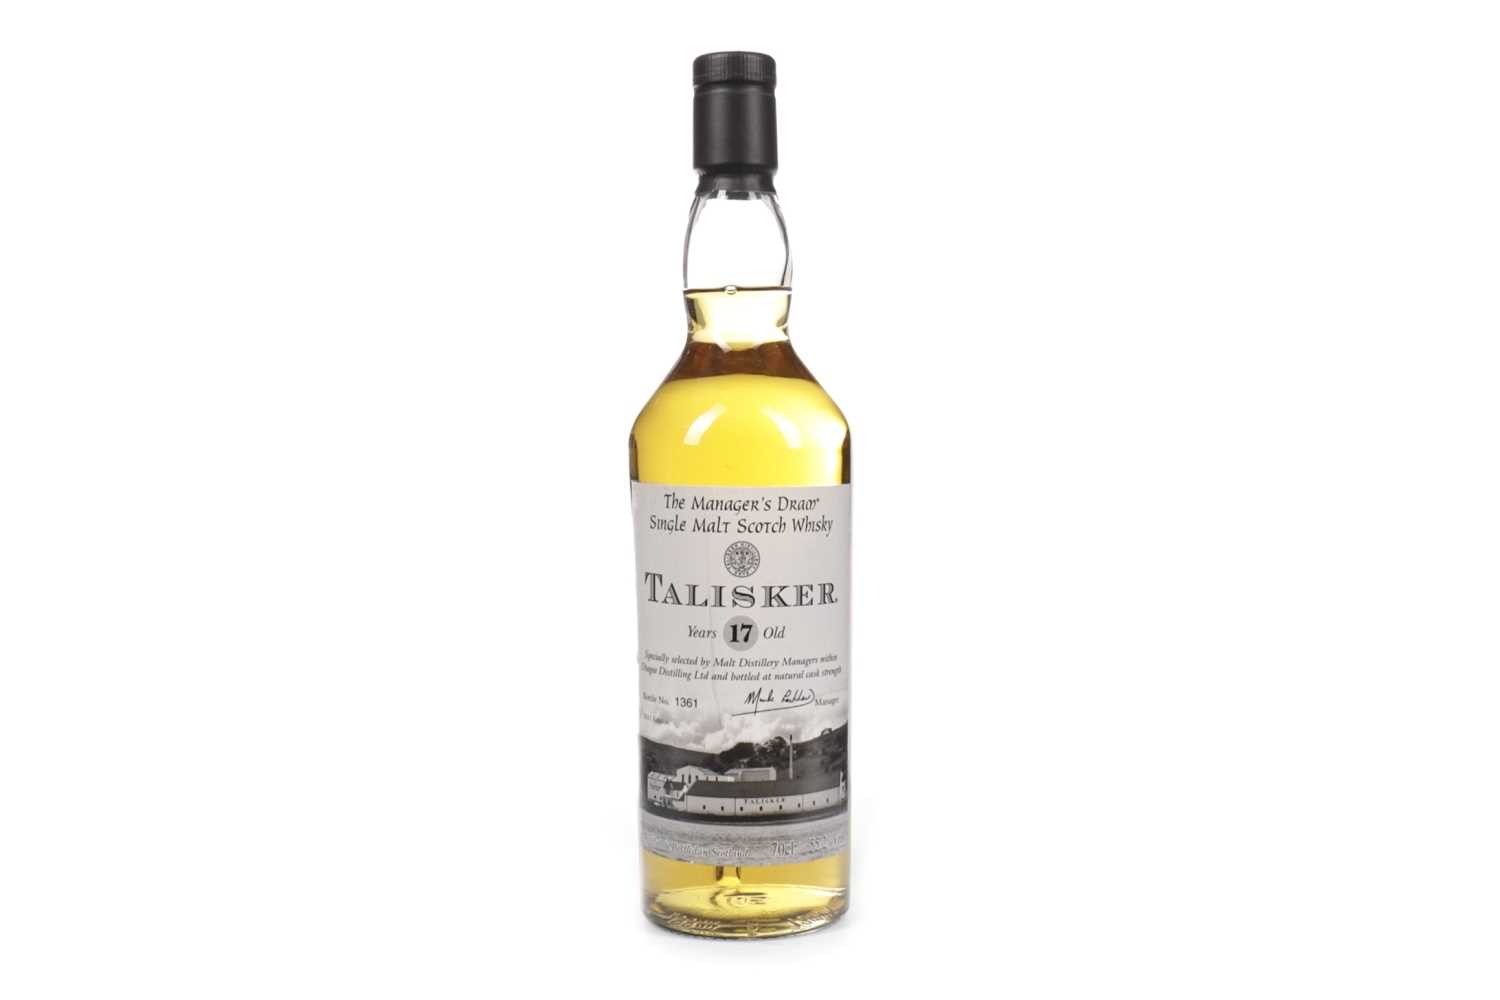 Lot 98 - TALISKER THE MANAGER'S DRAM AGED 17 YEARS